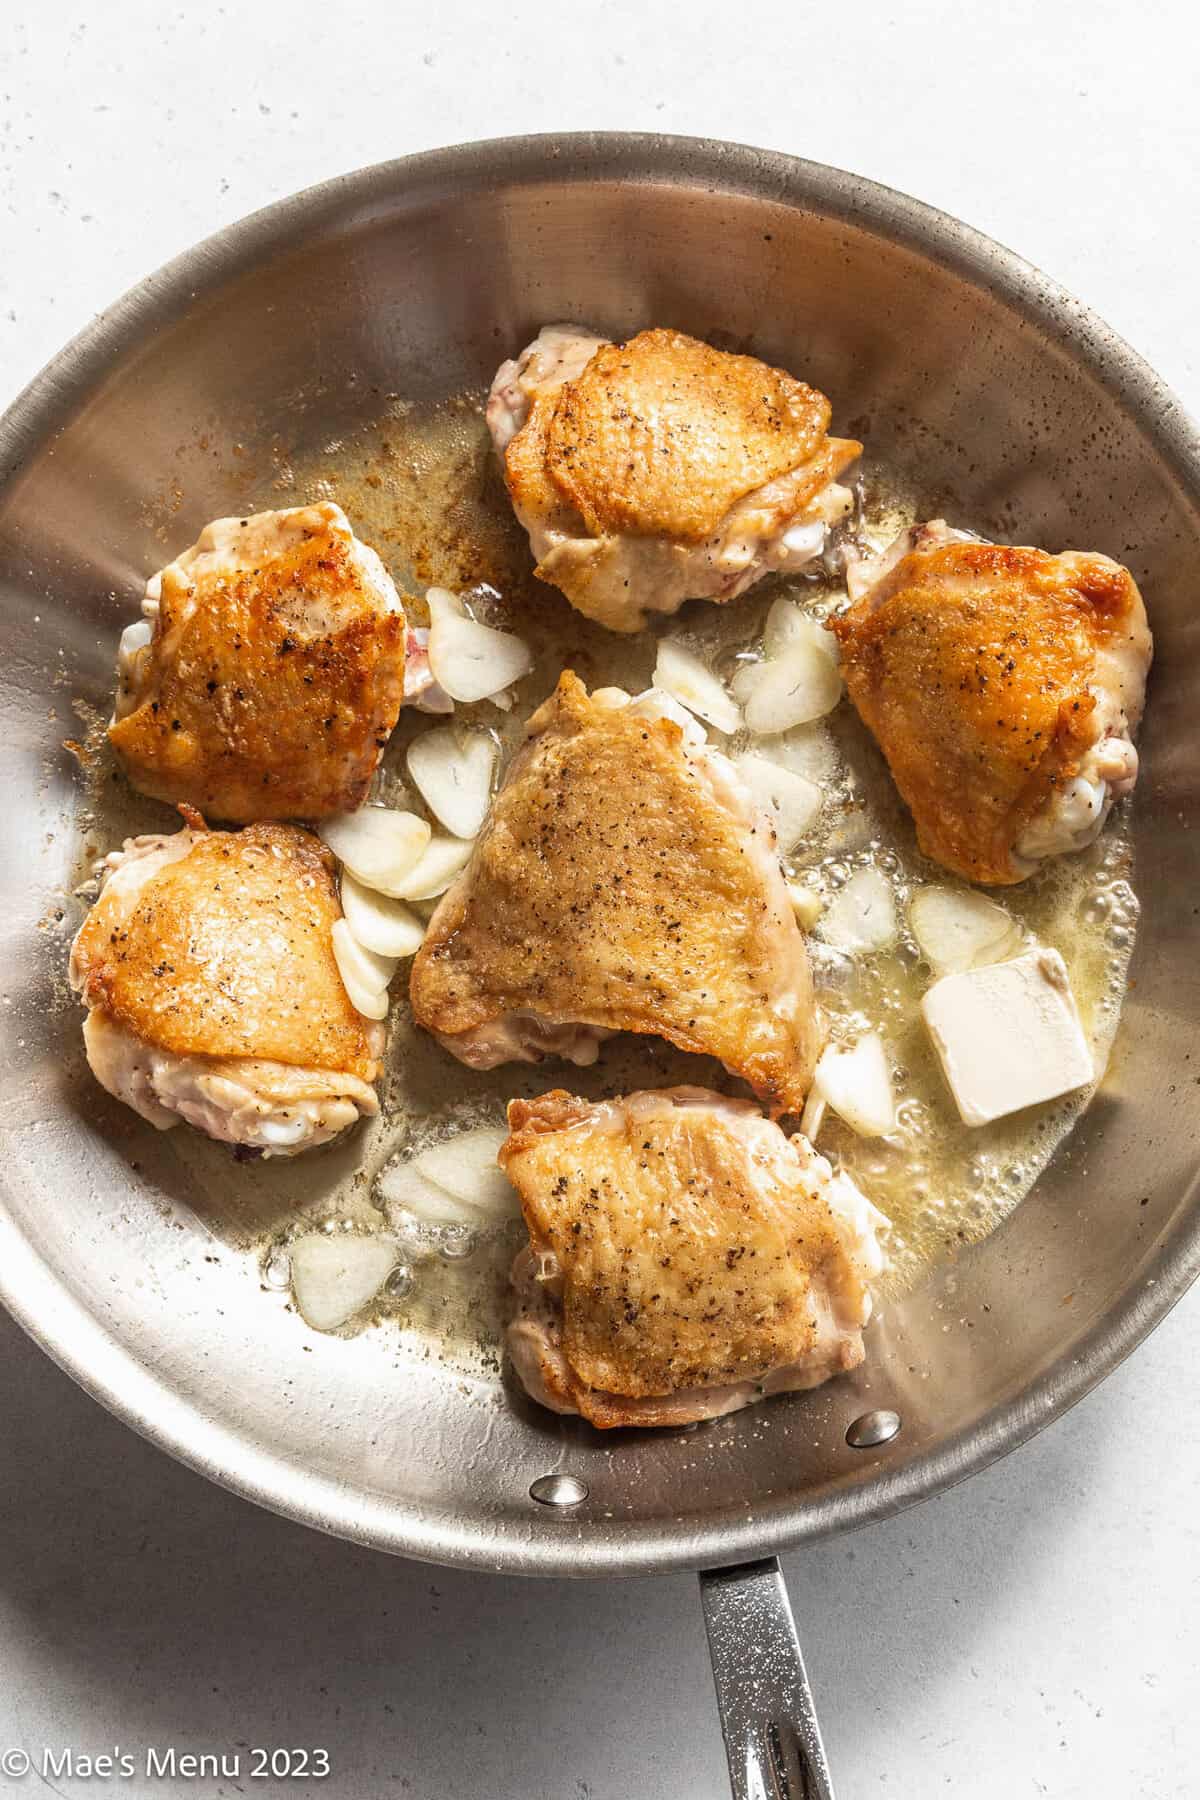 Seared chicken with garlic and butter in a skillet.